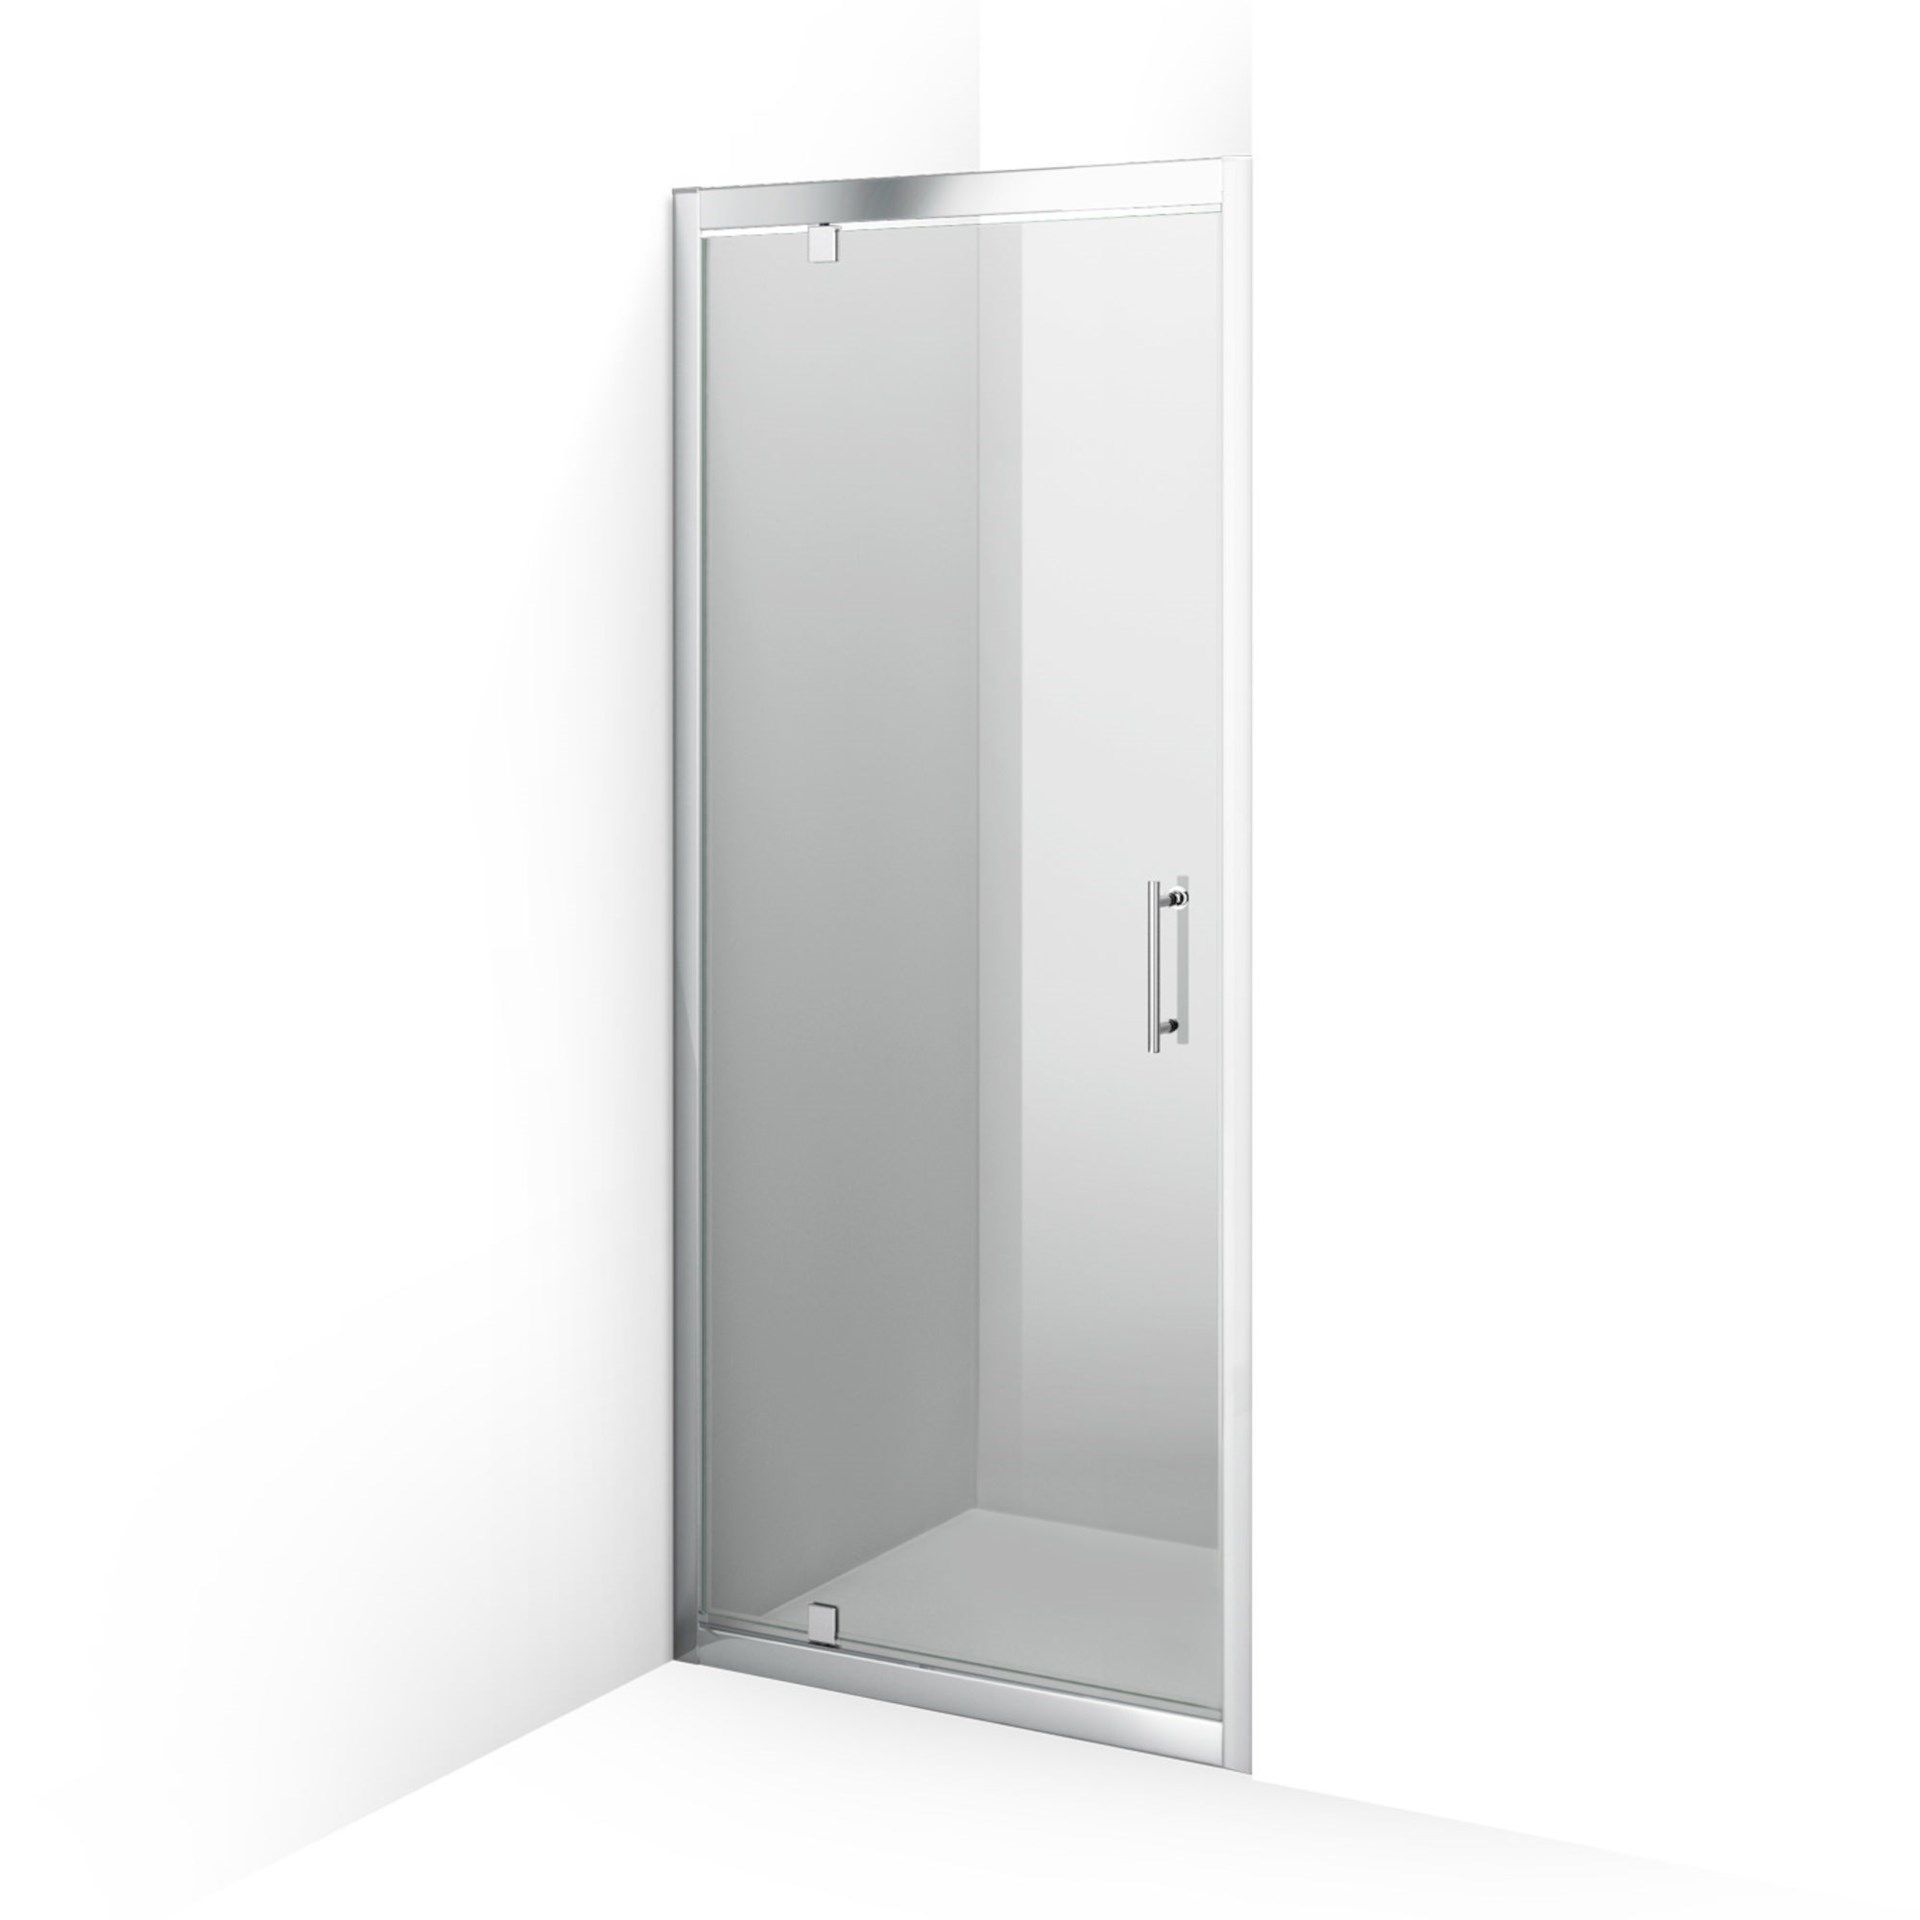 Brand New Twyfords 700mm - 6mm - Premium Pivot Shower Door. RRP £299.99.8mm Safety Glass Fully water - Image 2 of 2